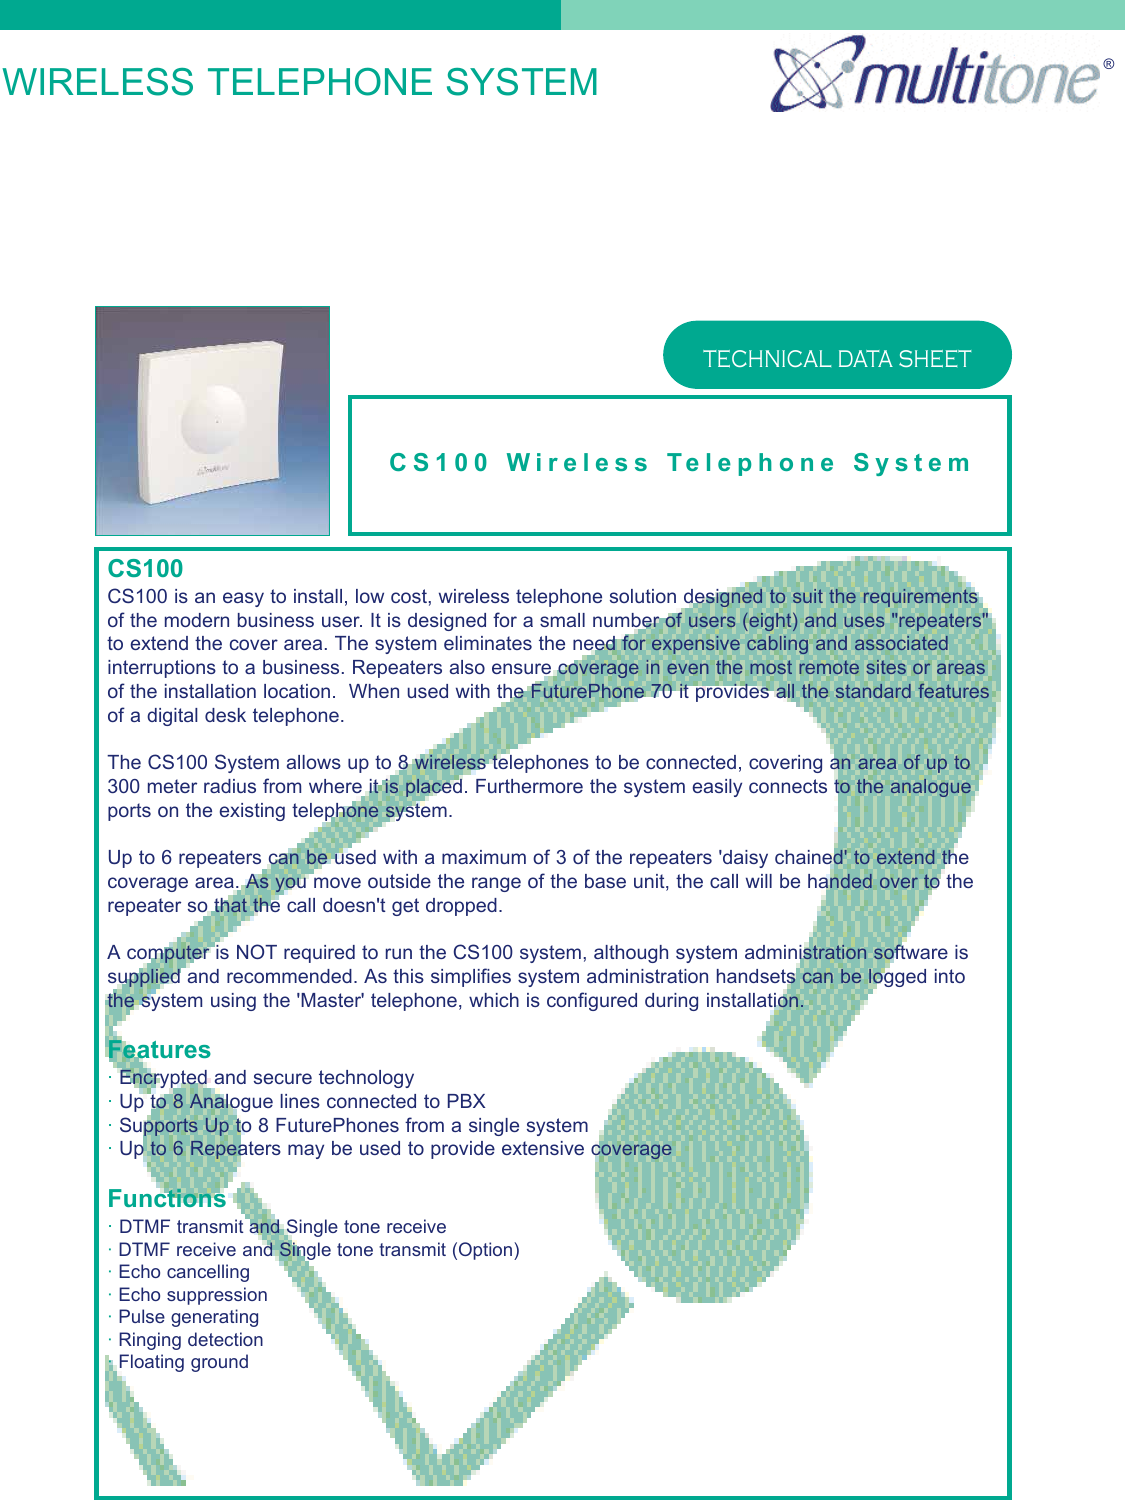 WIRELESS TELEPHONE SYSTEMCS100 Wireless Telephone SystemTECHNICAL DATA SHEET®CS100CS100 is an easy to install, low cost, wireless telephone solution designed to suit the requirementsof the modern business user. It is designed for a small number of users (eight) and uses &quot;repeaters&quot;to extend the cover area. The system eliminates the need for expensive cabling and associatedinterruptions to a business. Repeaters also ensure coverage in even the most remote sites or areasof the installation location.  When used with the FuturePhone 70 it provides all the standard featuresof a digital desk telephone.The CS100 System allows up to 8 wireless telephones to be connected, covering an area of up to300 meter radius from where it is placed. Furthermore the system easily connects to the analogueports on the existing telephone system.Up to 6 repeaters can be used with a maximum of 3 of the repeaters &apos;daisy chained&apos; to extend thecoverage area. As you move outside the range of the base unit, the call will be handed over to therepeater so that the call doesn&apos;t get dropped.A computer is NOT required to run the CS100 system, although system administration software issupplied and recommended. As this simplifies system administration handsets can be logged intothe system using the &apos;Master&apos; telephone, which is configured during installation.Features·Encrypted and secure technology·Up to 8 Analogue lines connected to PBX·Supports Up to 8 FuturePhones from a single system·Up to 6 Repeaters may be used to provide extensive coverageFunctions·DTMF transmit and Single tone receive·DTMF receive and Single tone transmit (Option)·Echo cancelling·Echo suppression·Pulse generating·Ringing detection·Floating ground